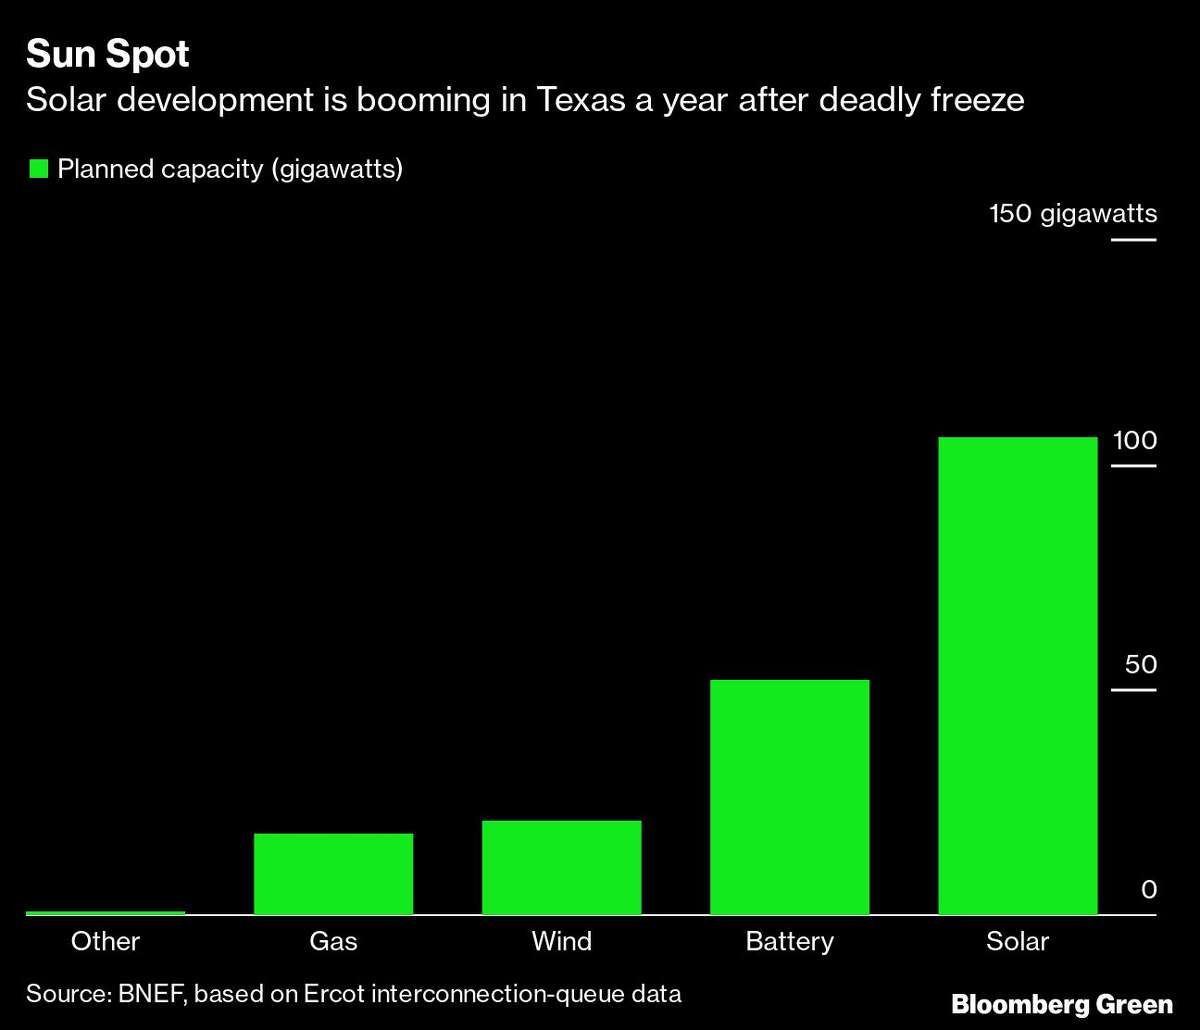 Solar development is booming in Texas a year after deadly freeze. 